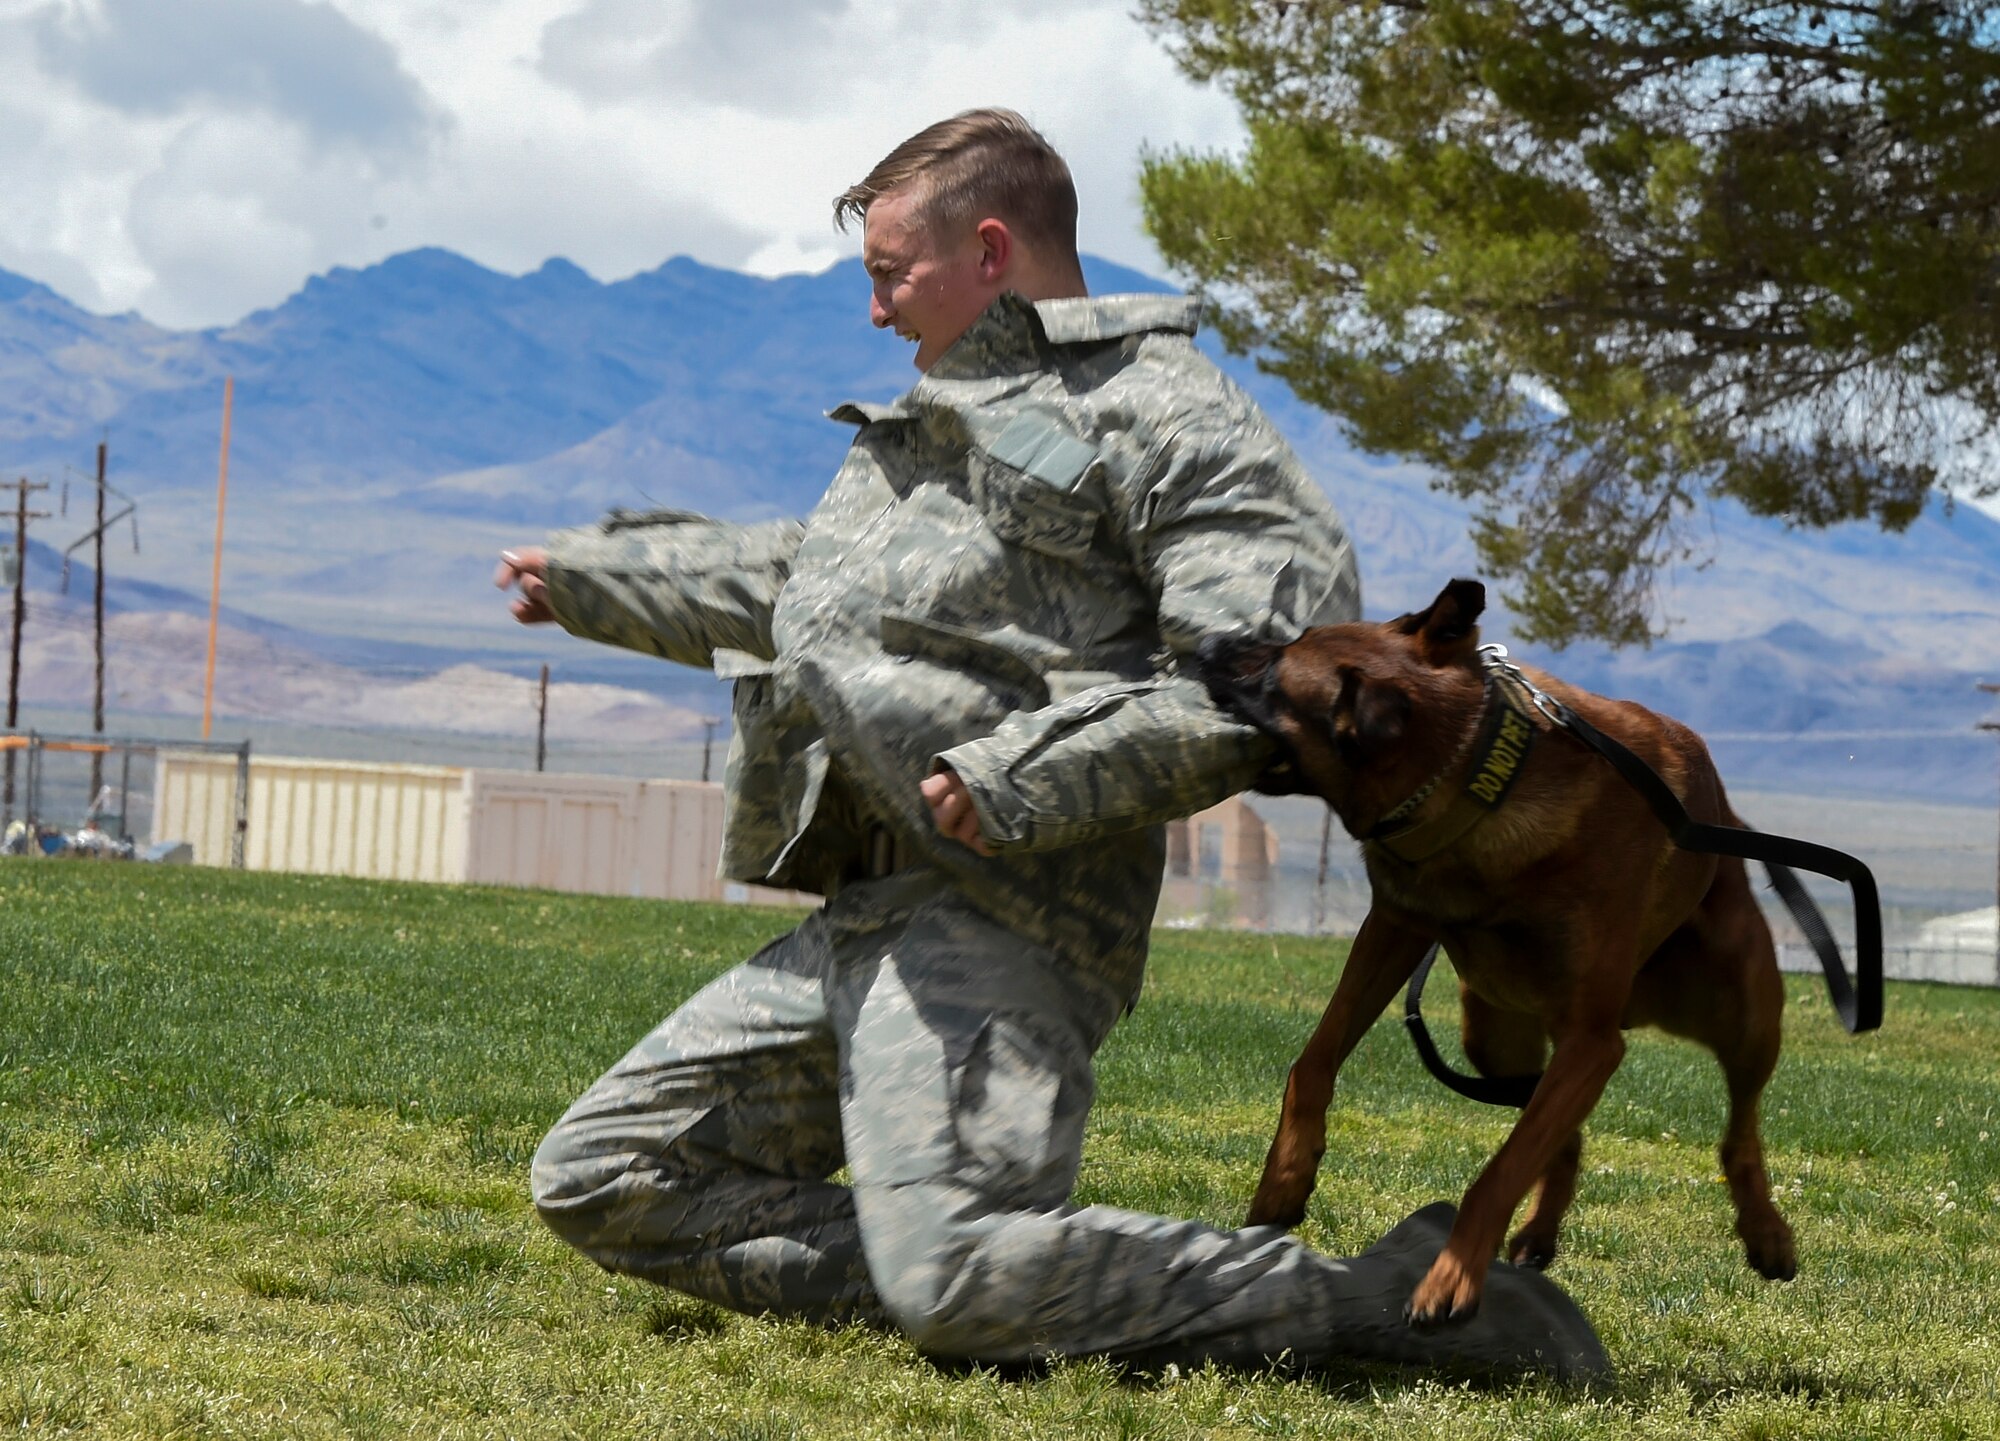 Samuel, 799th Security Forces Squadron military working dog, takes down a simulated combative during a K-9 demonstration at a local high school March 17, 2016, in Indian Springs, Nevada. The demonstration was part of National Police Week, an observance which honors civilian and military law enforcement members who have paid the ultimate sacrifice. (U.S. Air Force photo by Senior Airman Adarius Petty/Released)